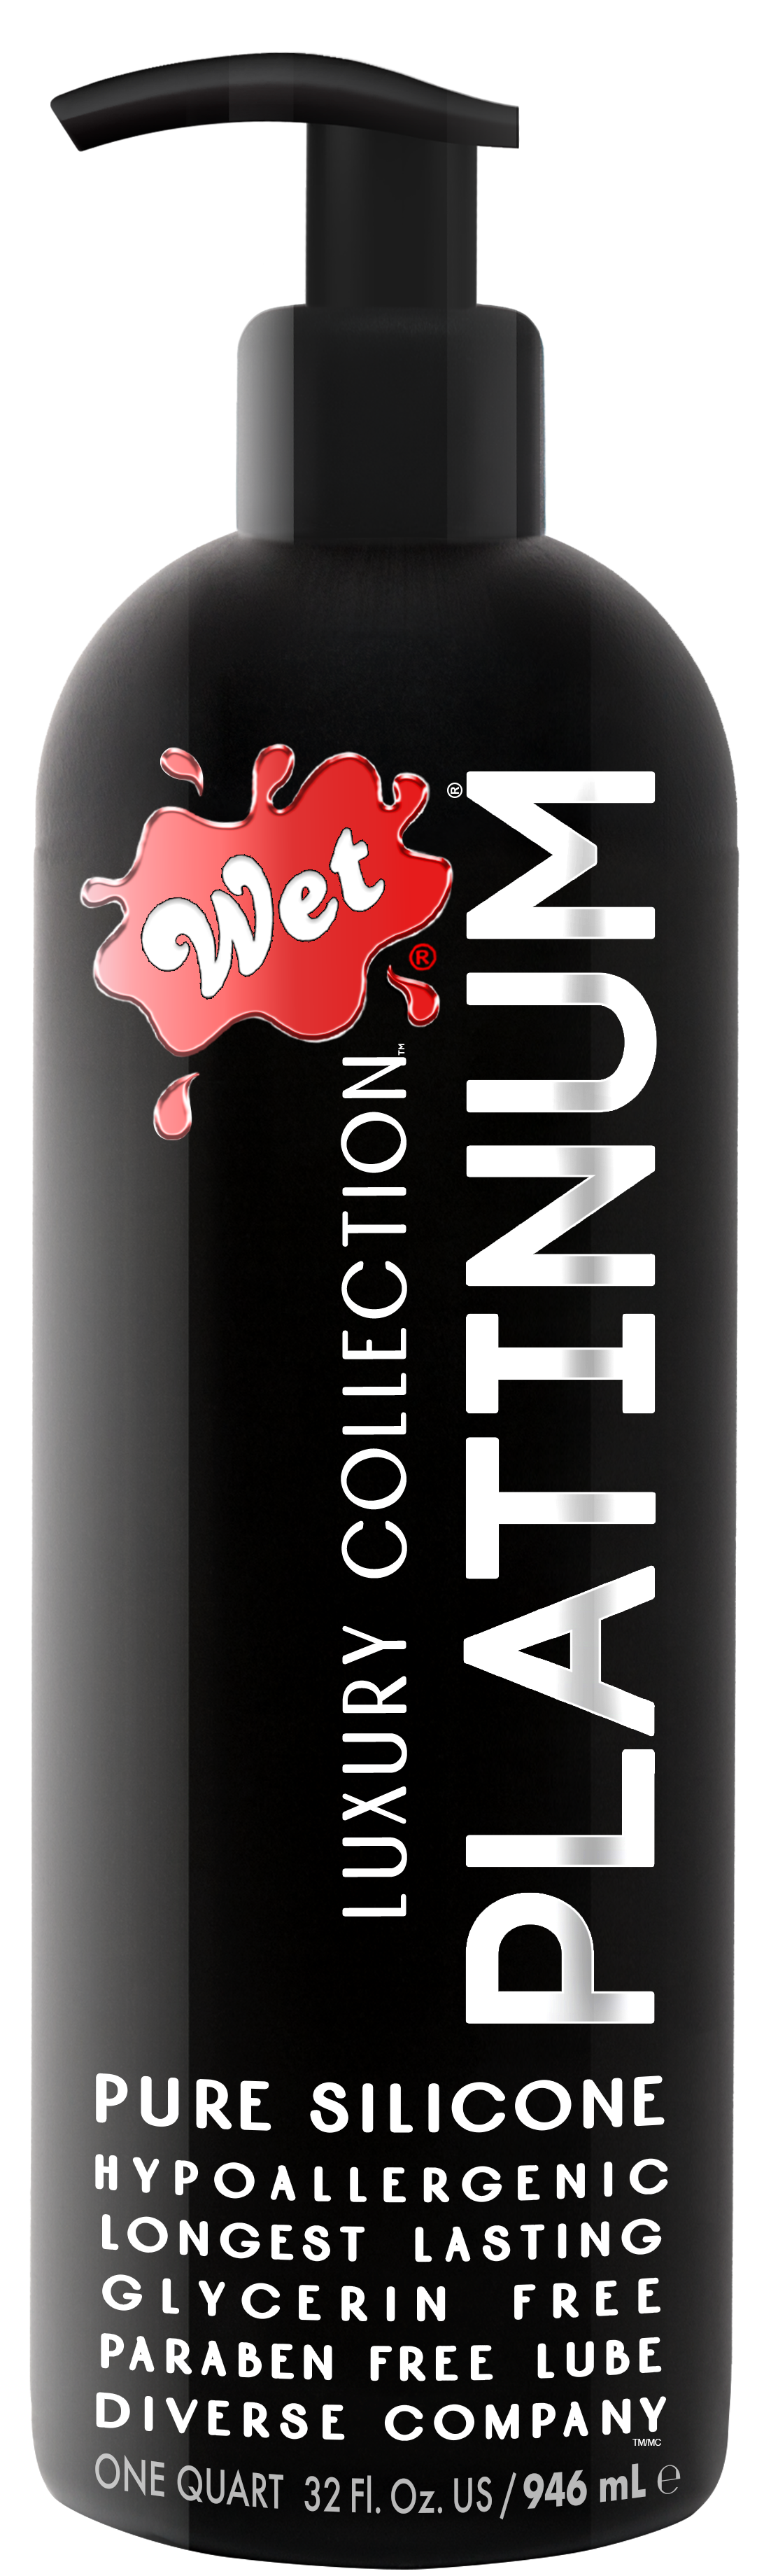 Wet Platinum Silicone Based Sex Lube 32 Ounce